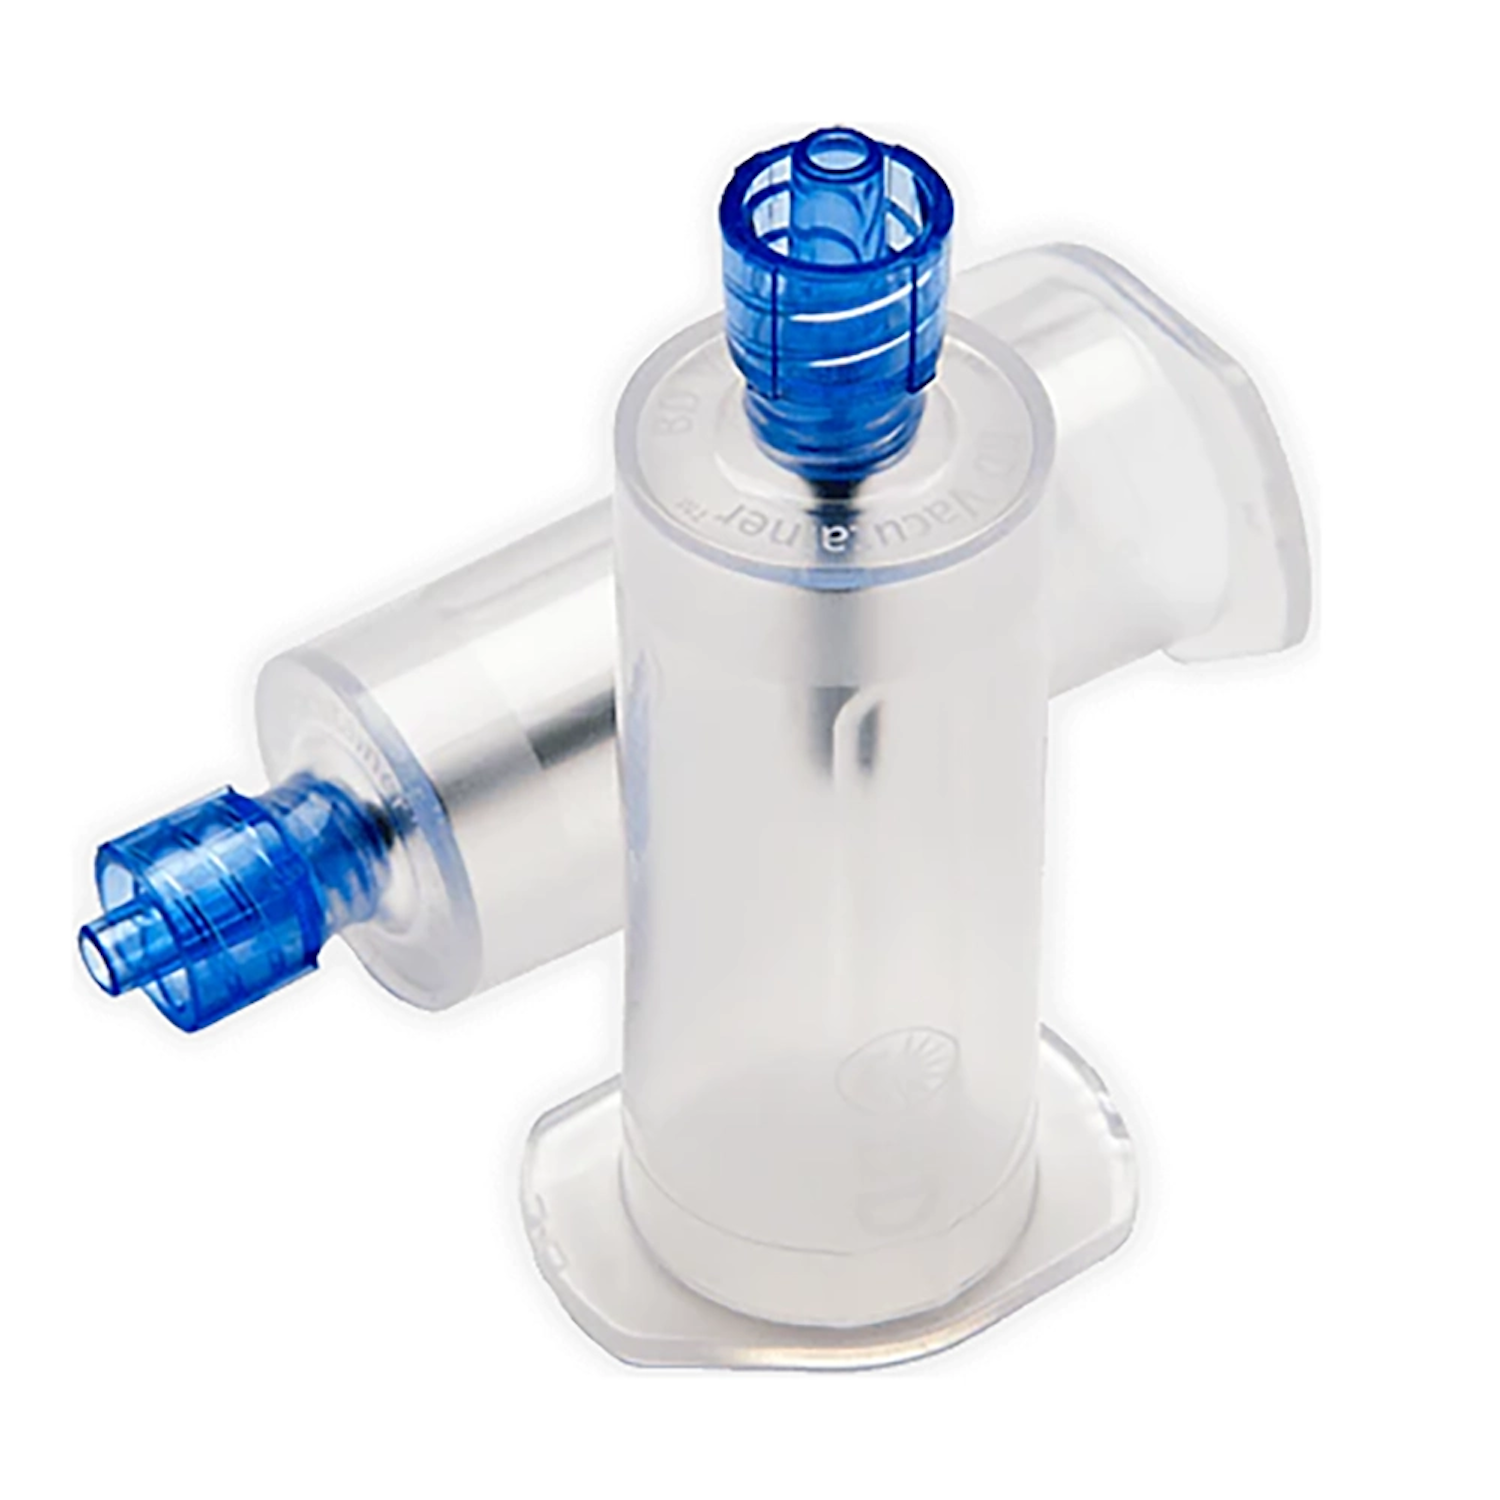 BD Vacutainer Luer-Lok Access Device | Pack of 198